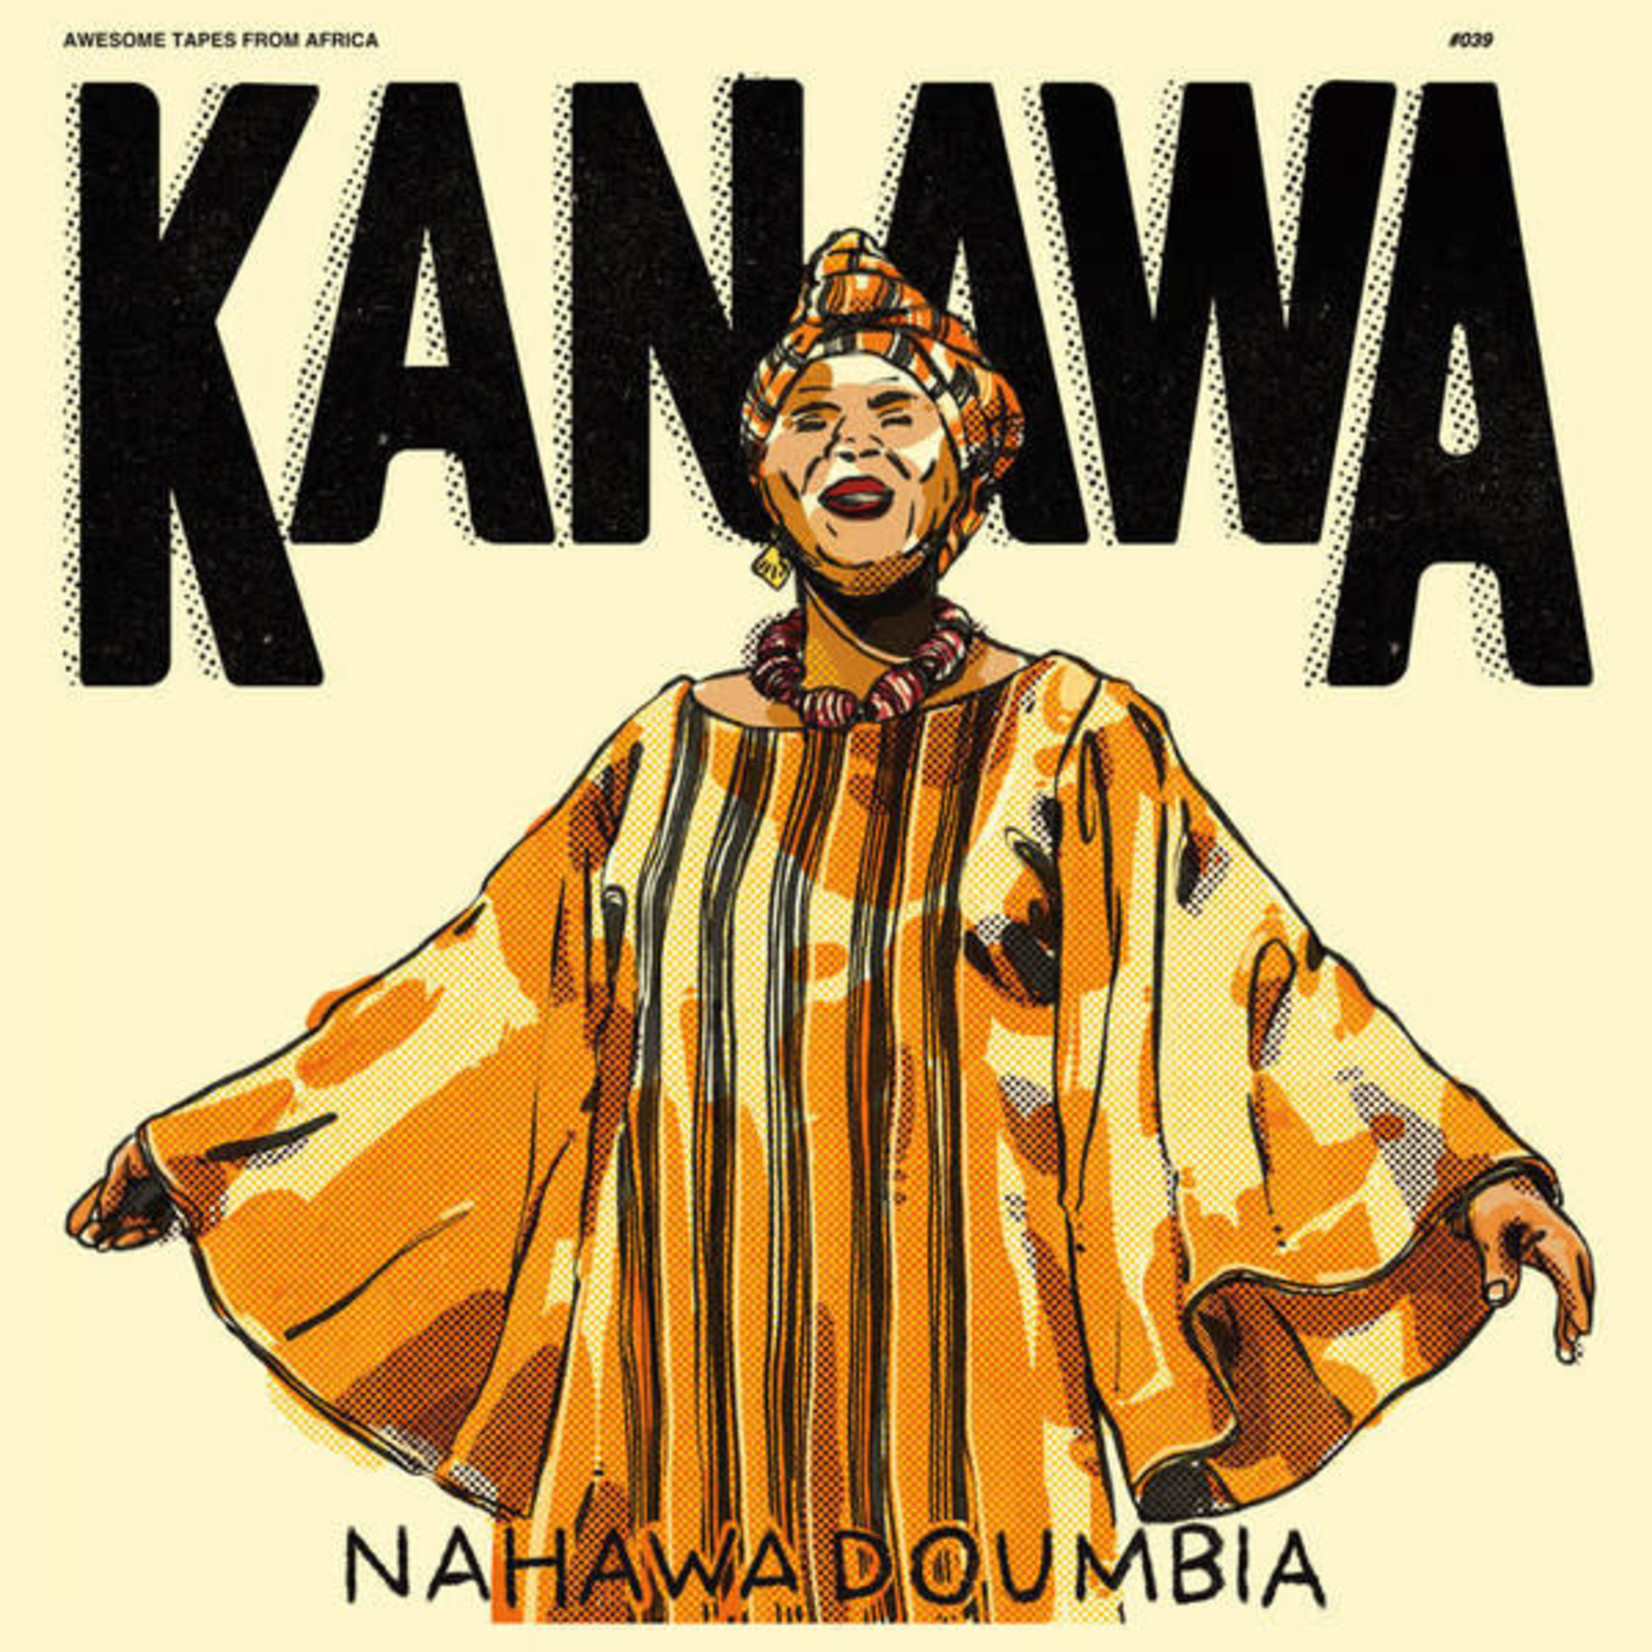 Awesome Tapes From Africa Nahawa Doumbia - Kanawa (LP)